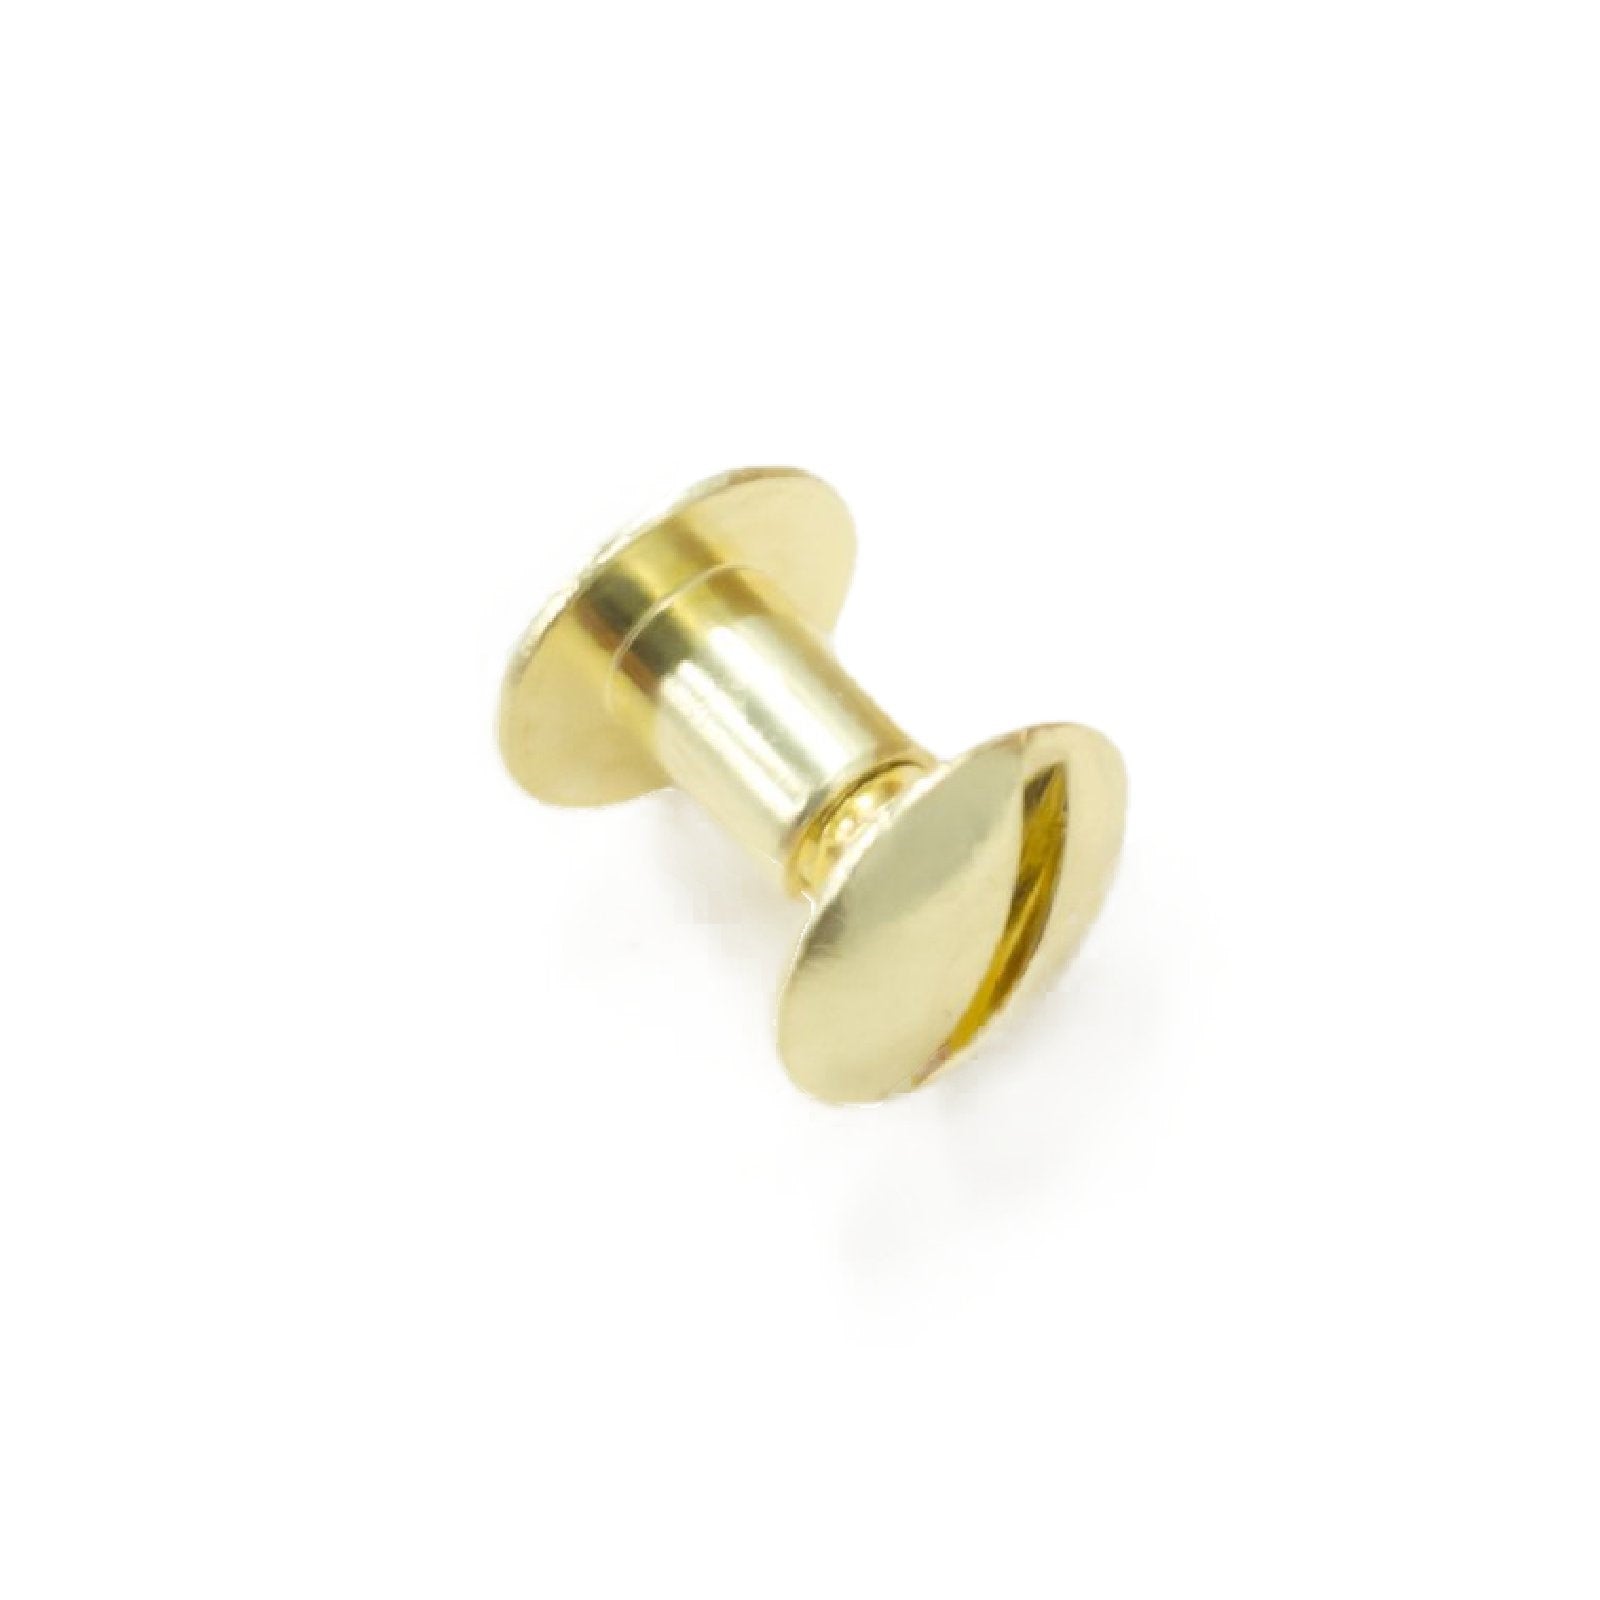 Chicago Screws, 6 mm/ 1/4", Brass / 1 Piece | The Leather Guy